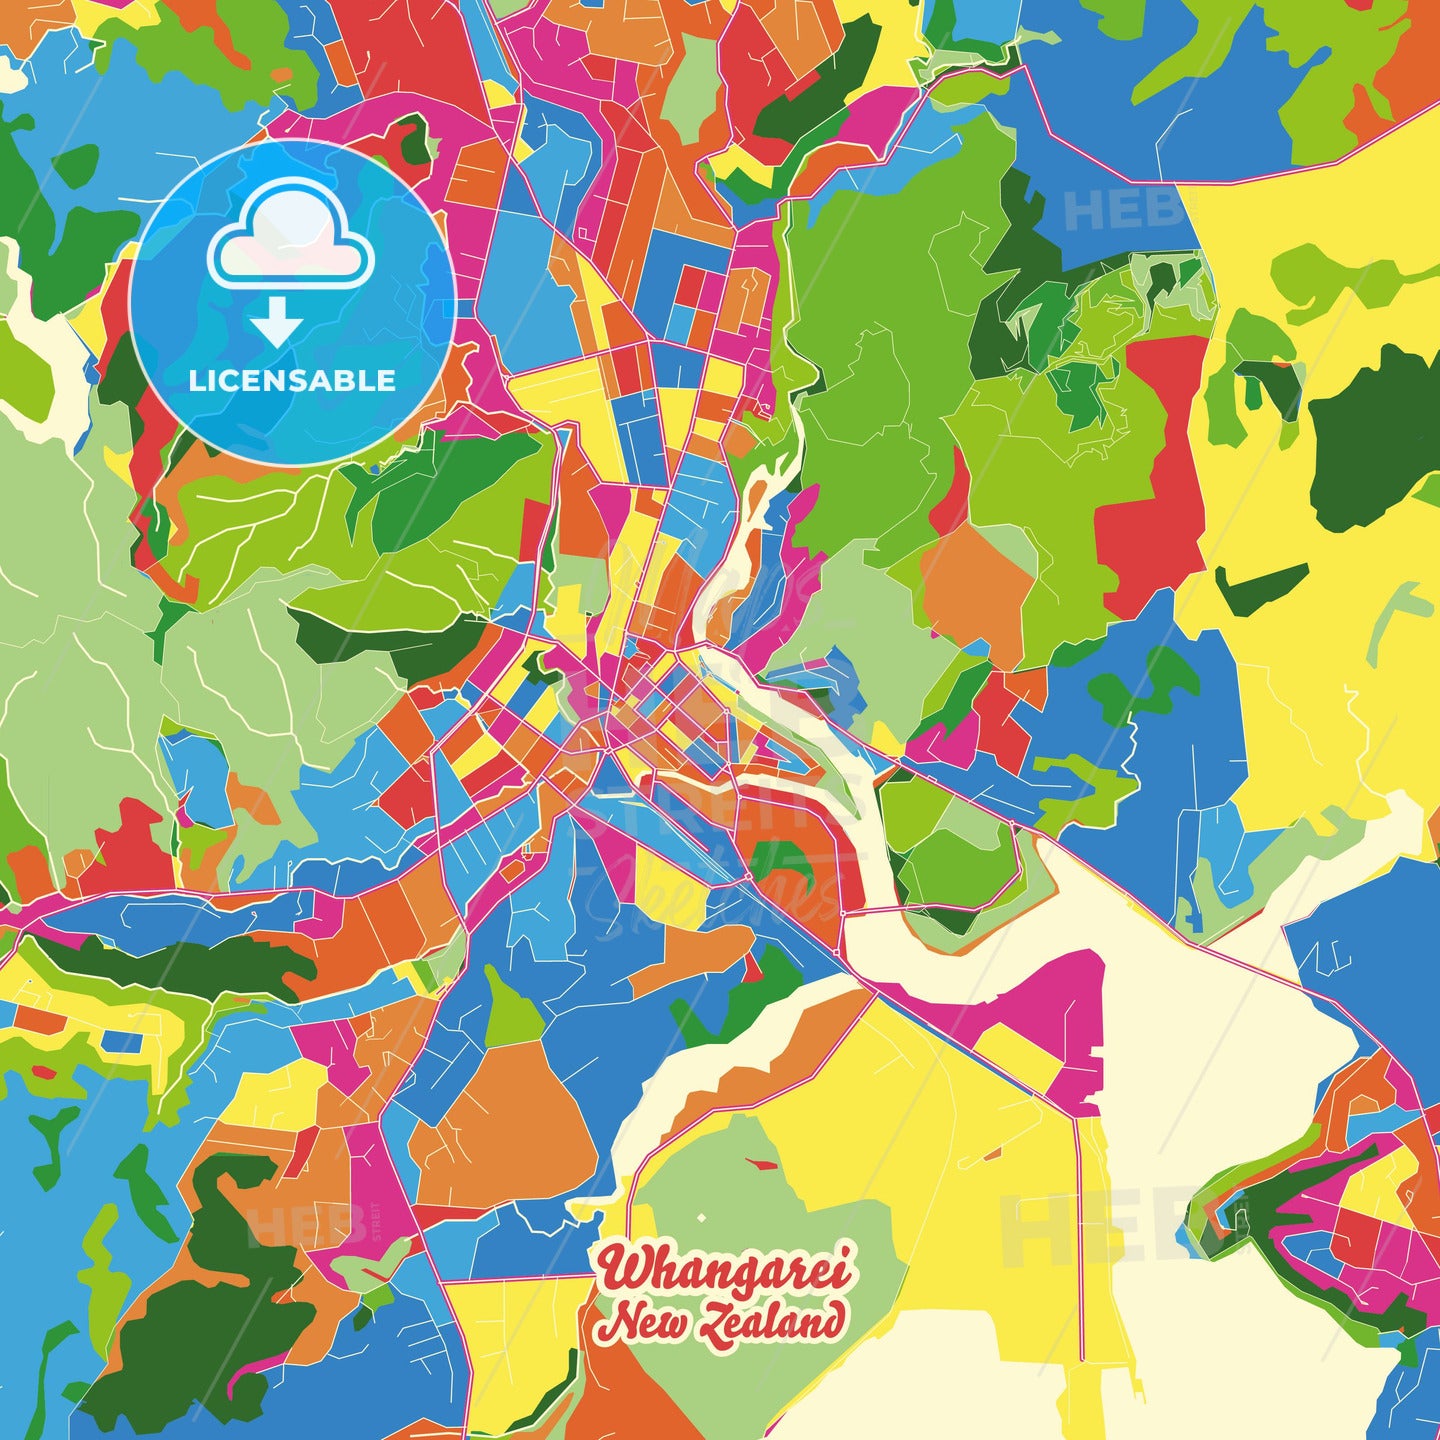 Whangarei, New Zealand Crazy Colorful Street Map Poster Template - HEBSTREITS Sketches